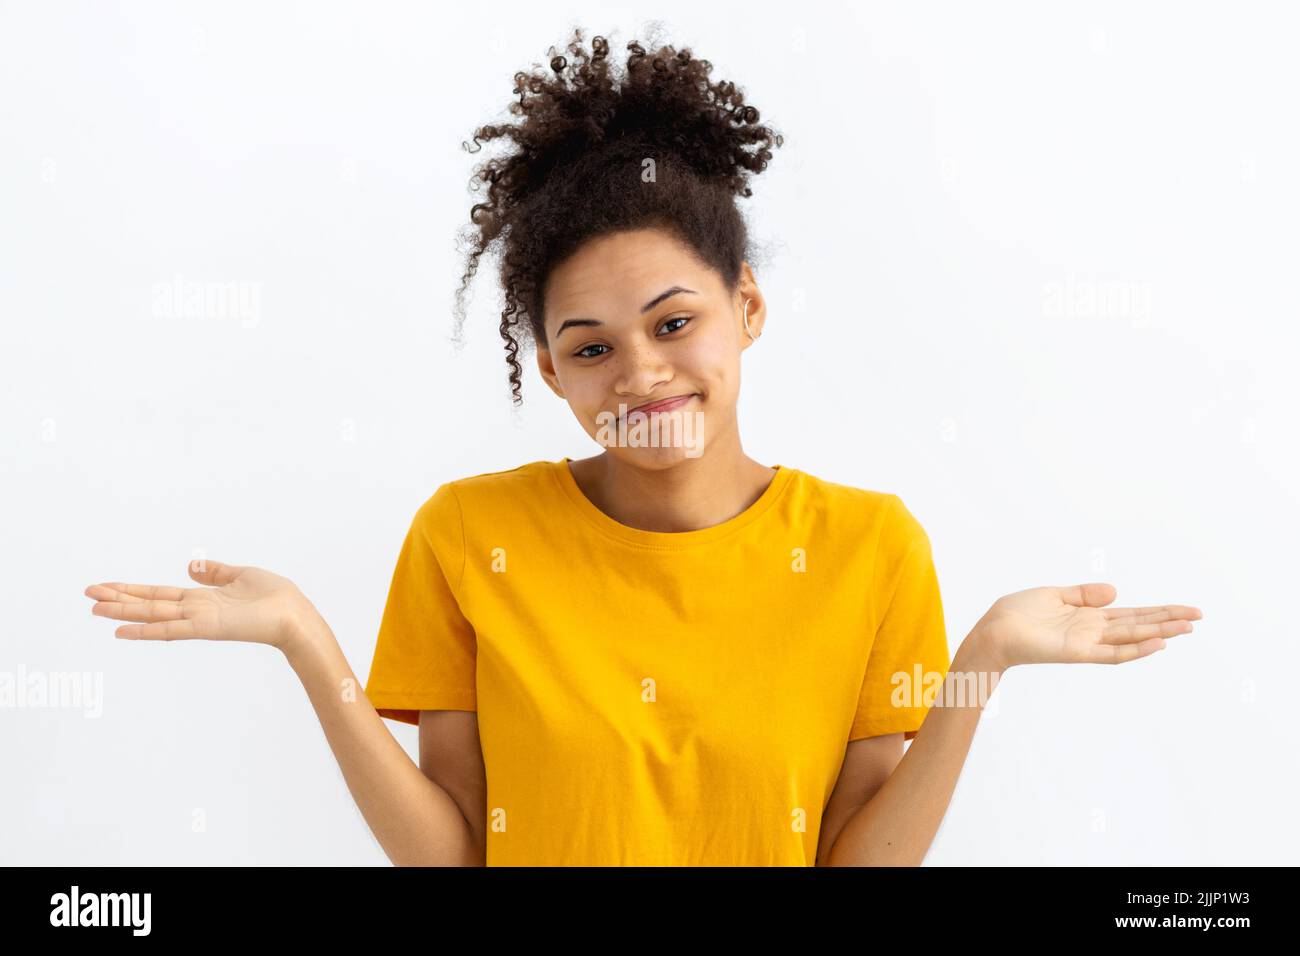 Portrait of young unhappy African American with curly hair raises her hands in despair on white background Stock Photo